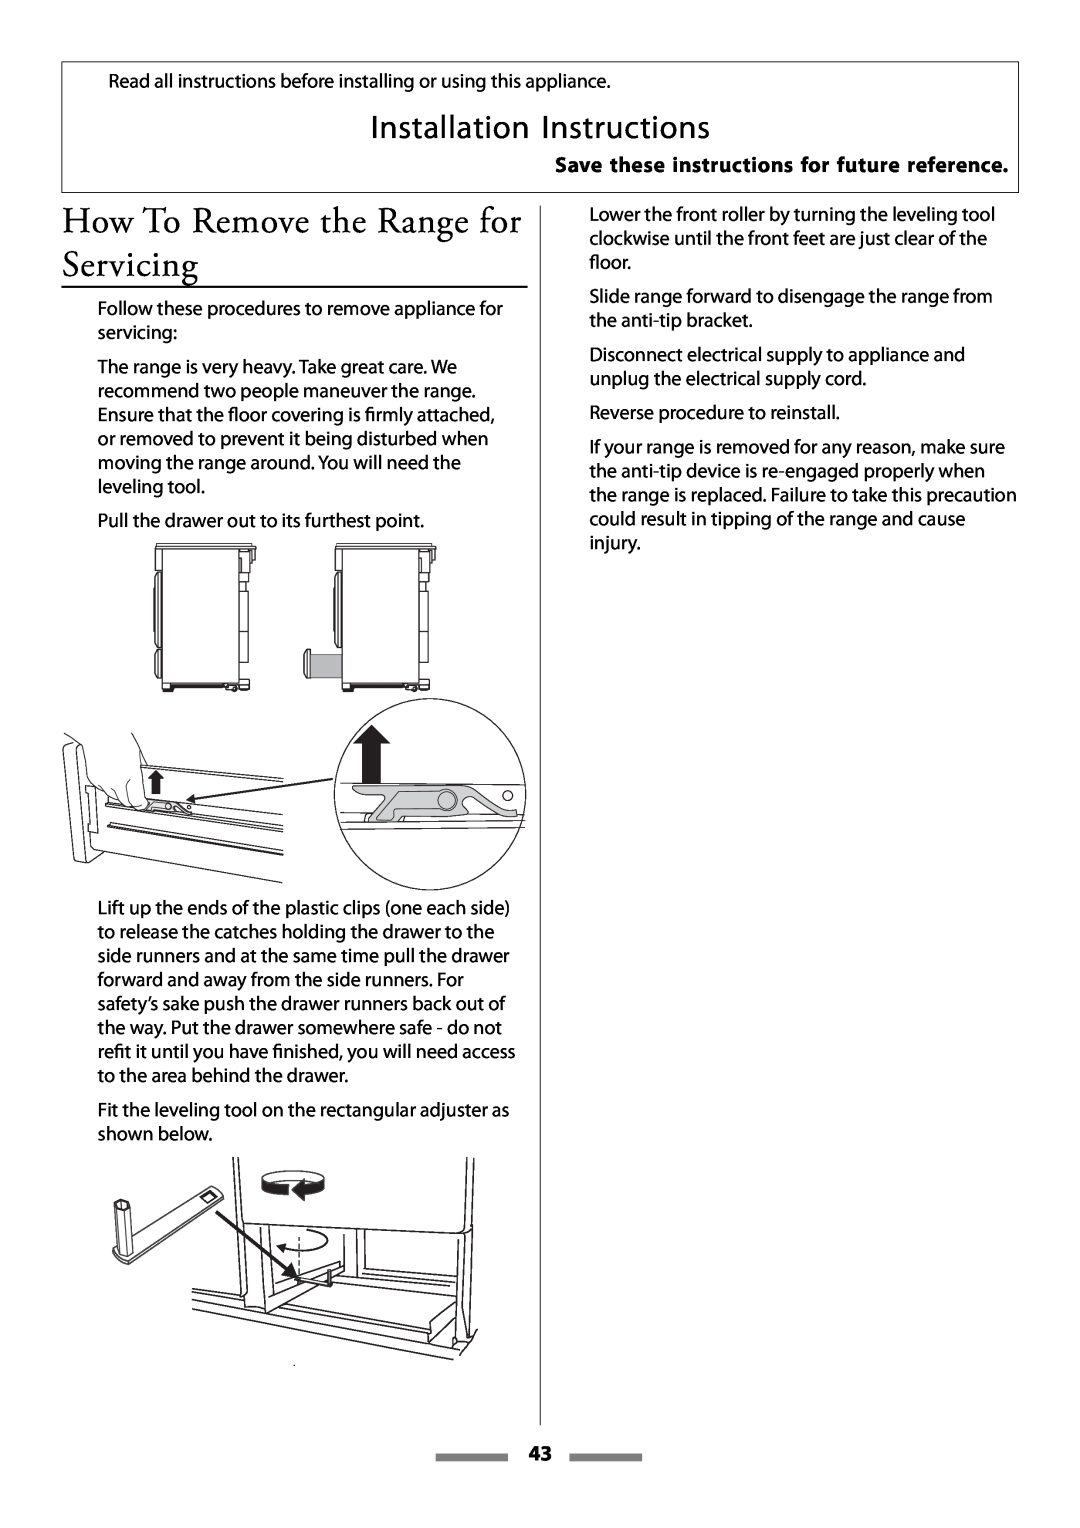 Aga Ranges Legacy 44 installation instructions How To Remove the Range for Servicing, Installation Instructions 